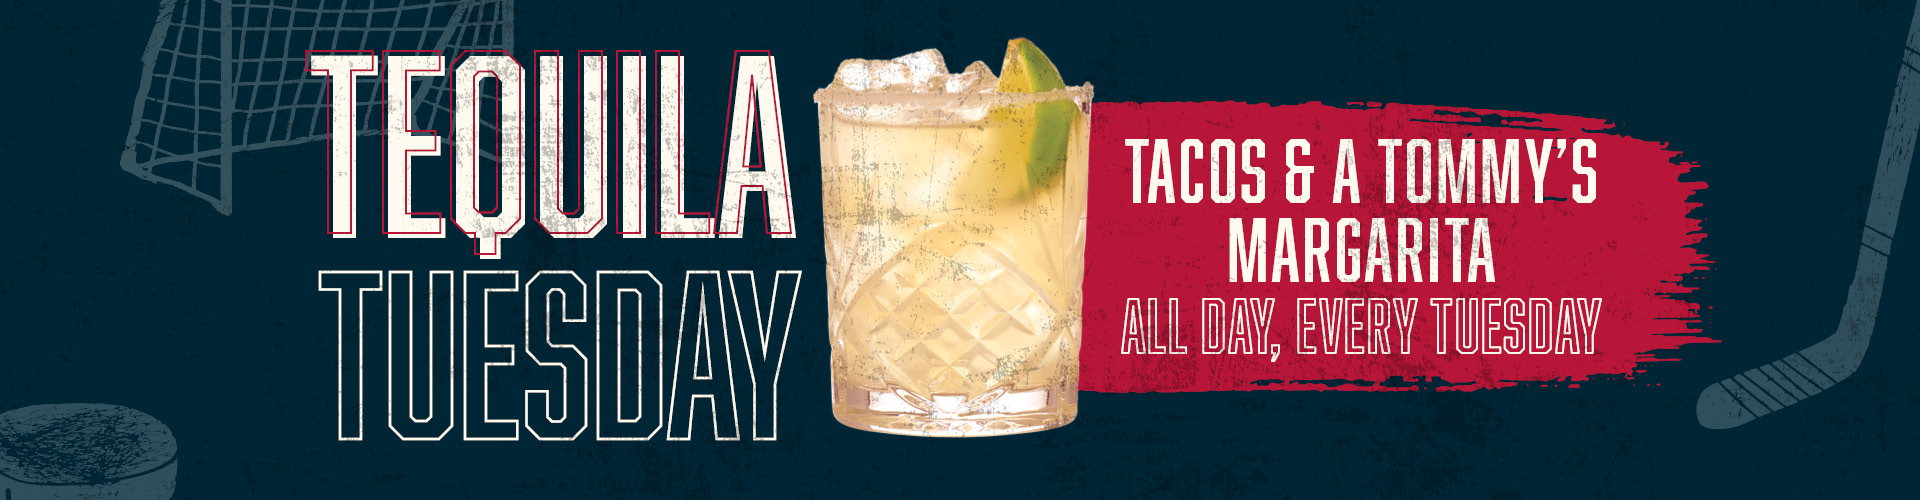 Tequila Tuesday - Tacos & a Tommy's Margarita - All day, every tuesday